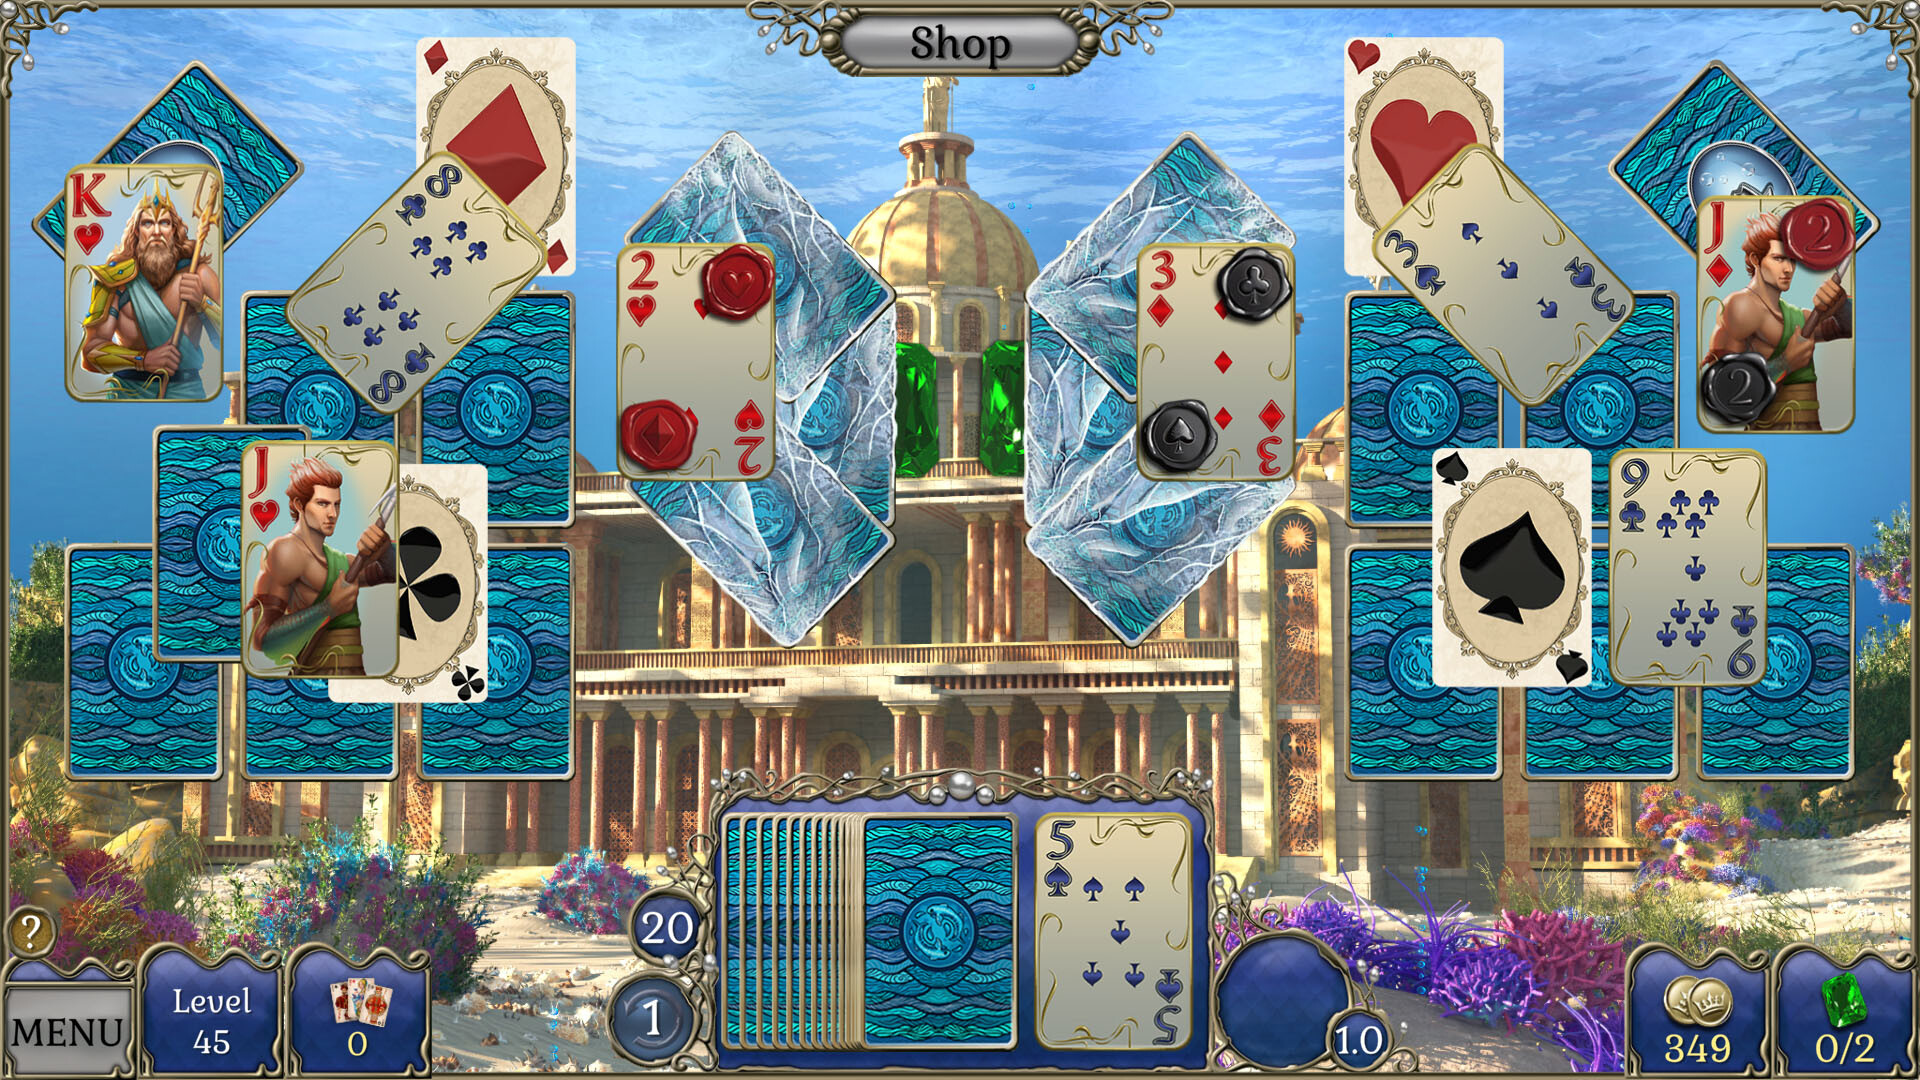 Jewel Match Atlantis Solitaire 4 Collector's Edition Steam CD Key 6.71 $